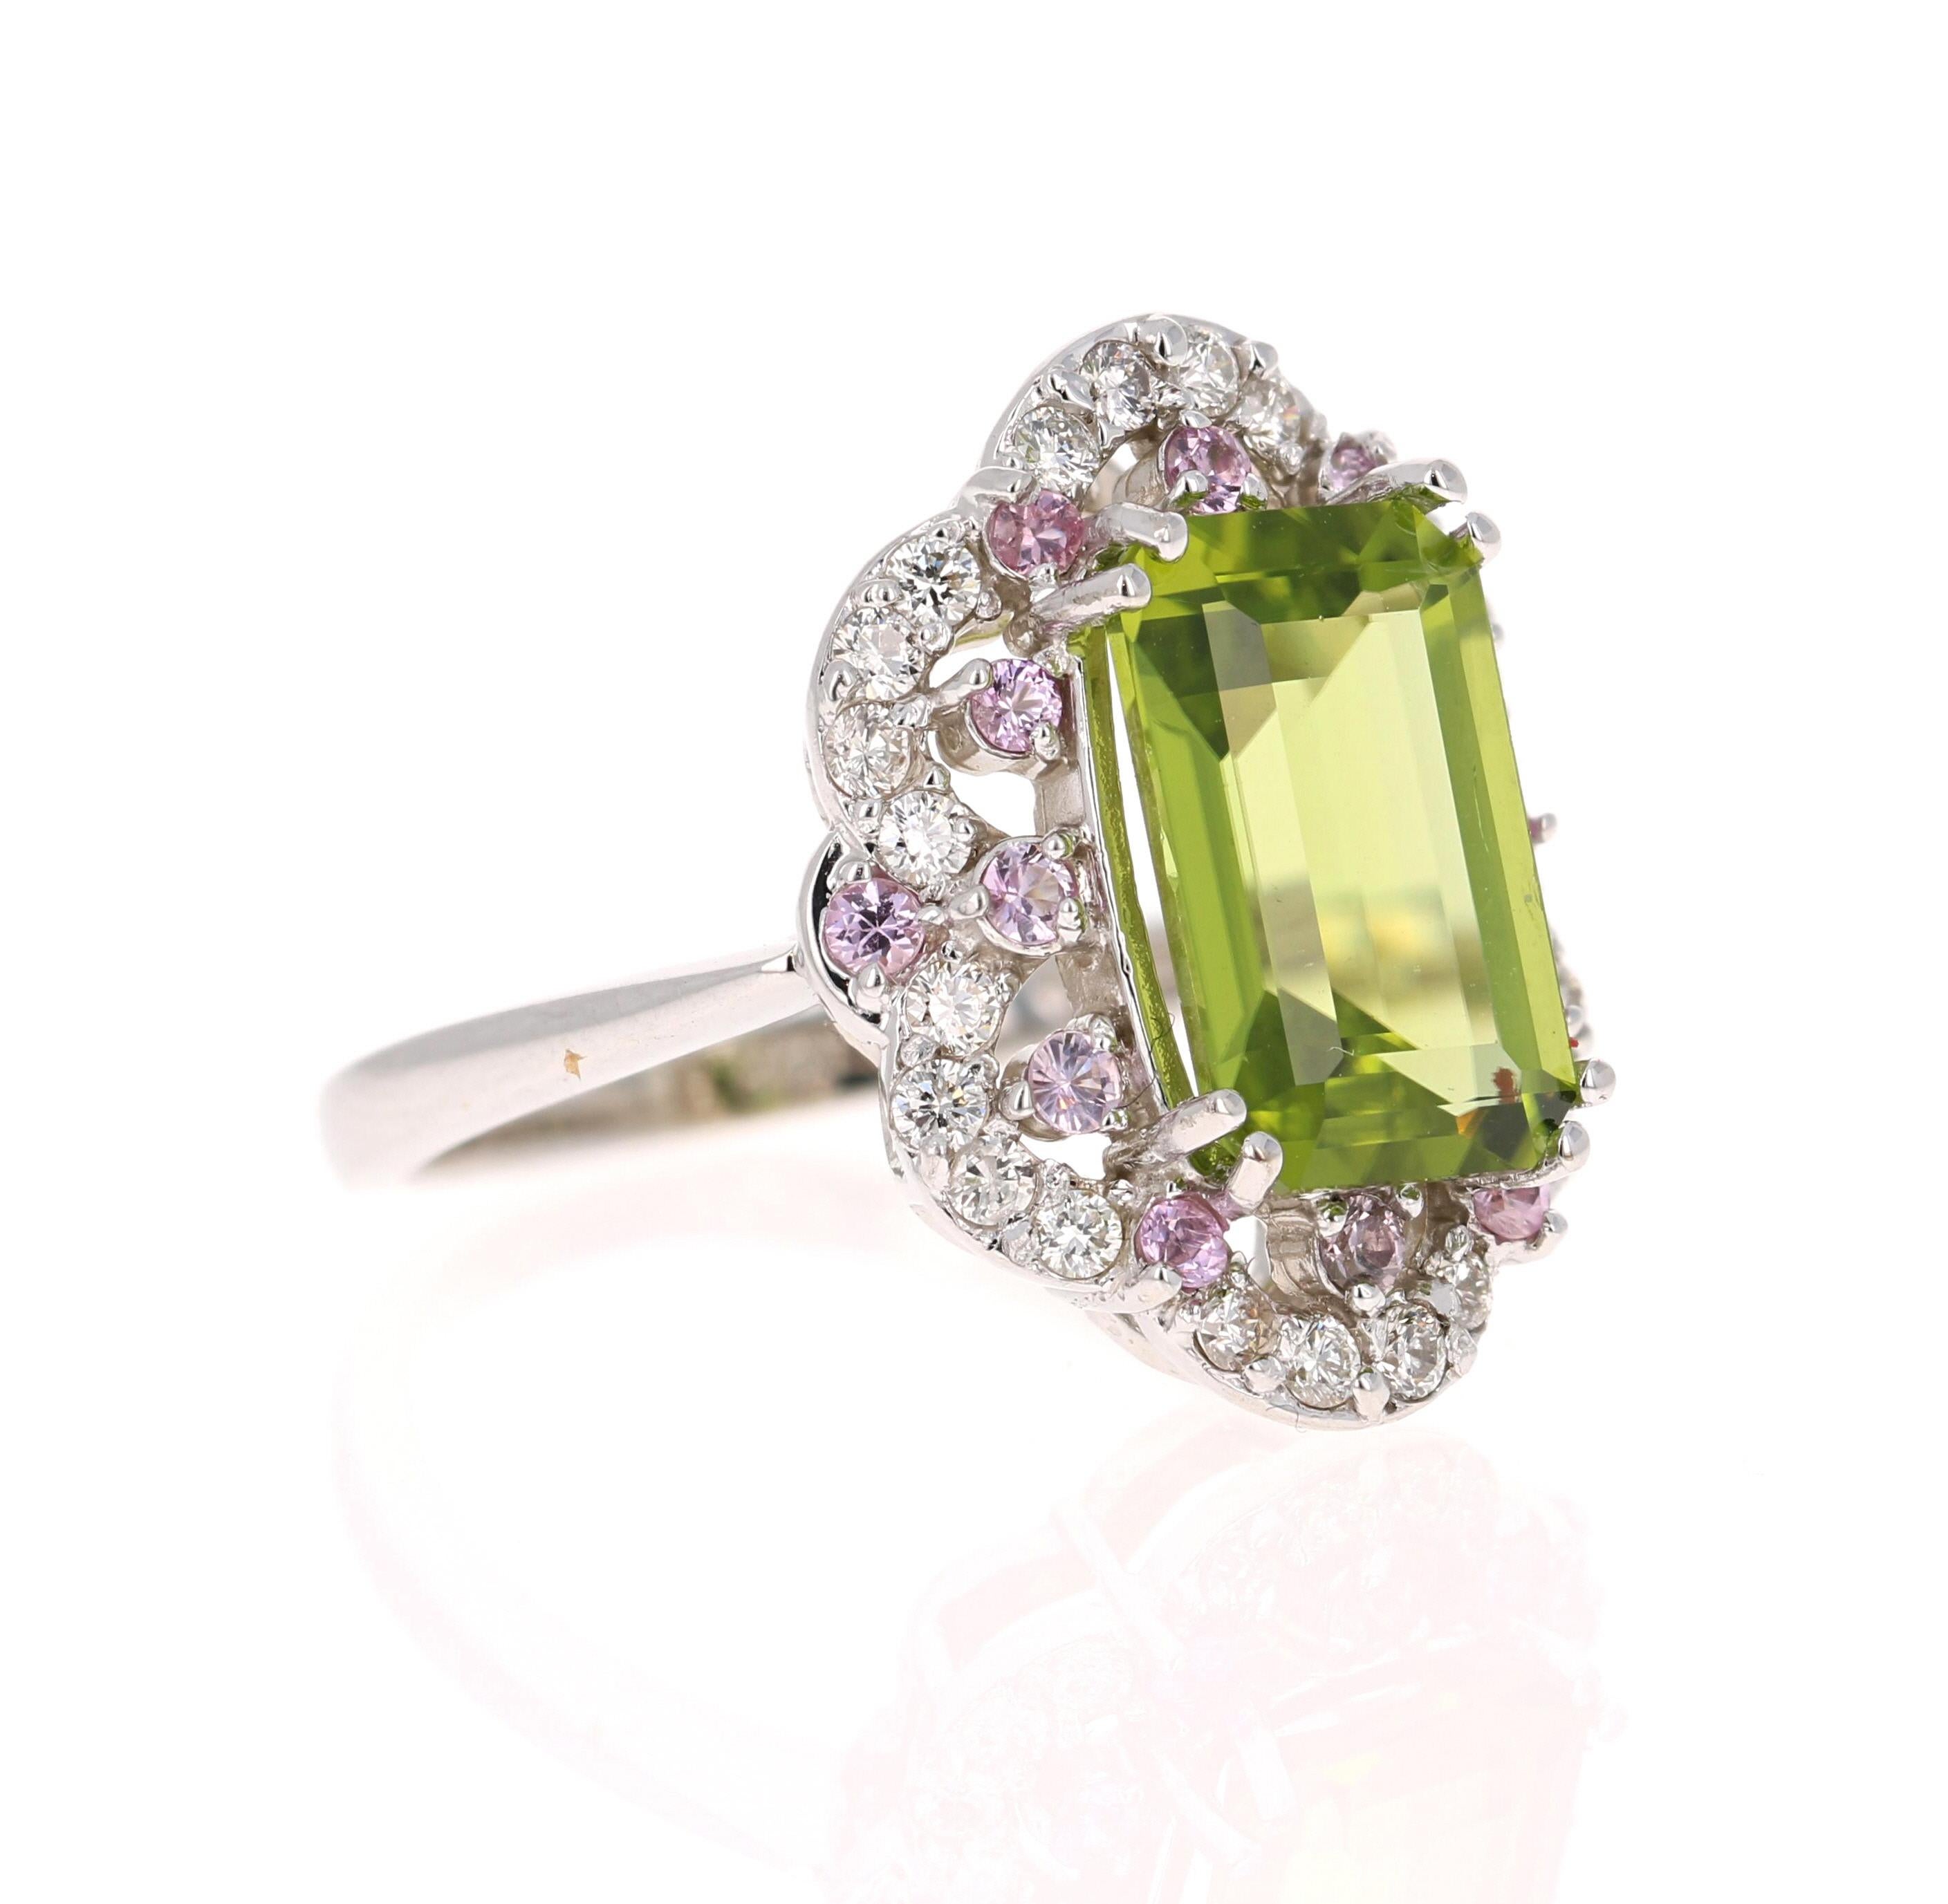 This Peridot and Diamond Ring has a 4.10 Carat Emerald Cut Peridot and is surrounded by 14 Pink Sapphires that weigh 0.33 Carats and 24 Round Cut Diamonds that weigh 0.43 Carats. (Clarity: VS, Color: H) The total carat weight of the ring is 4.86